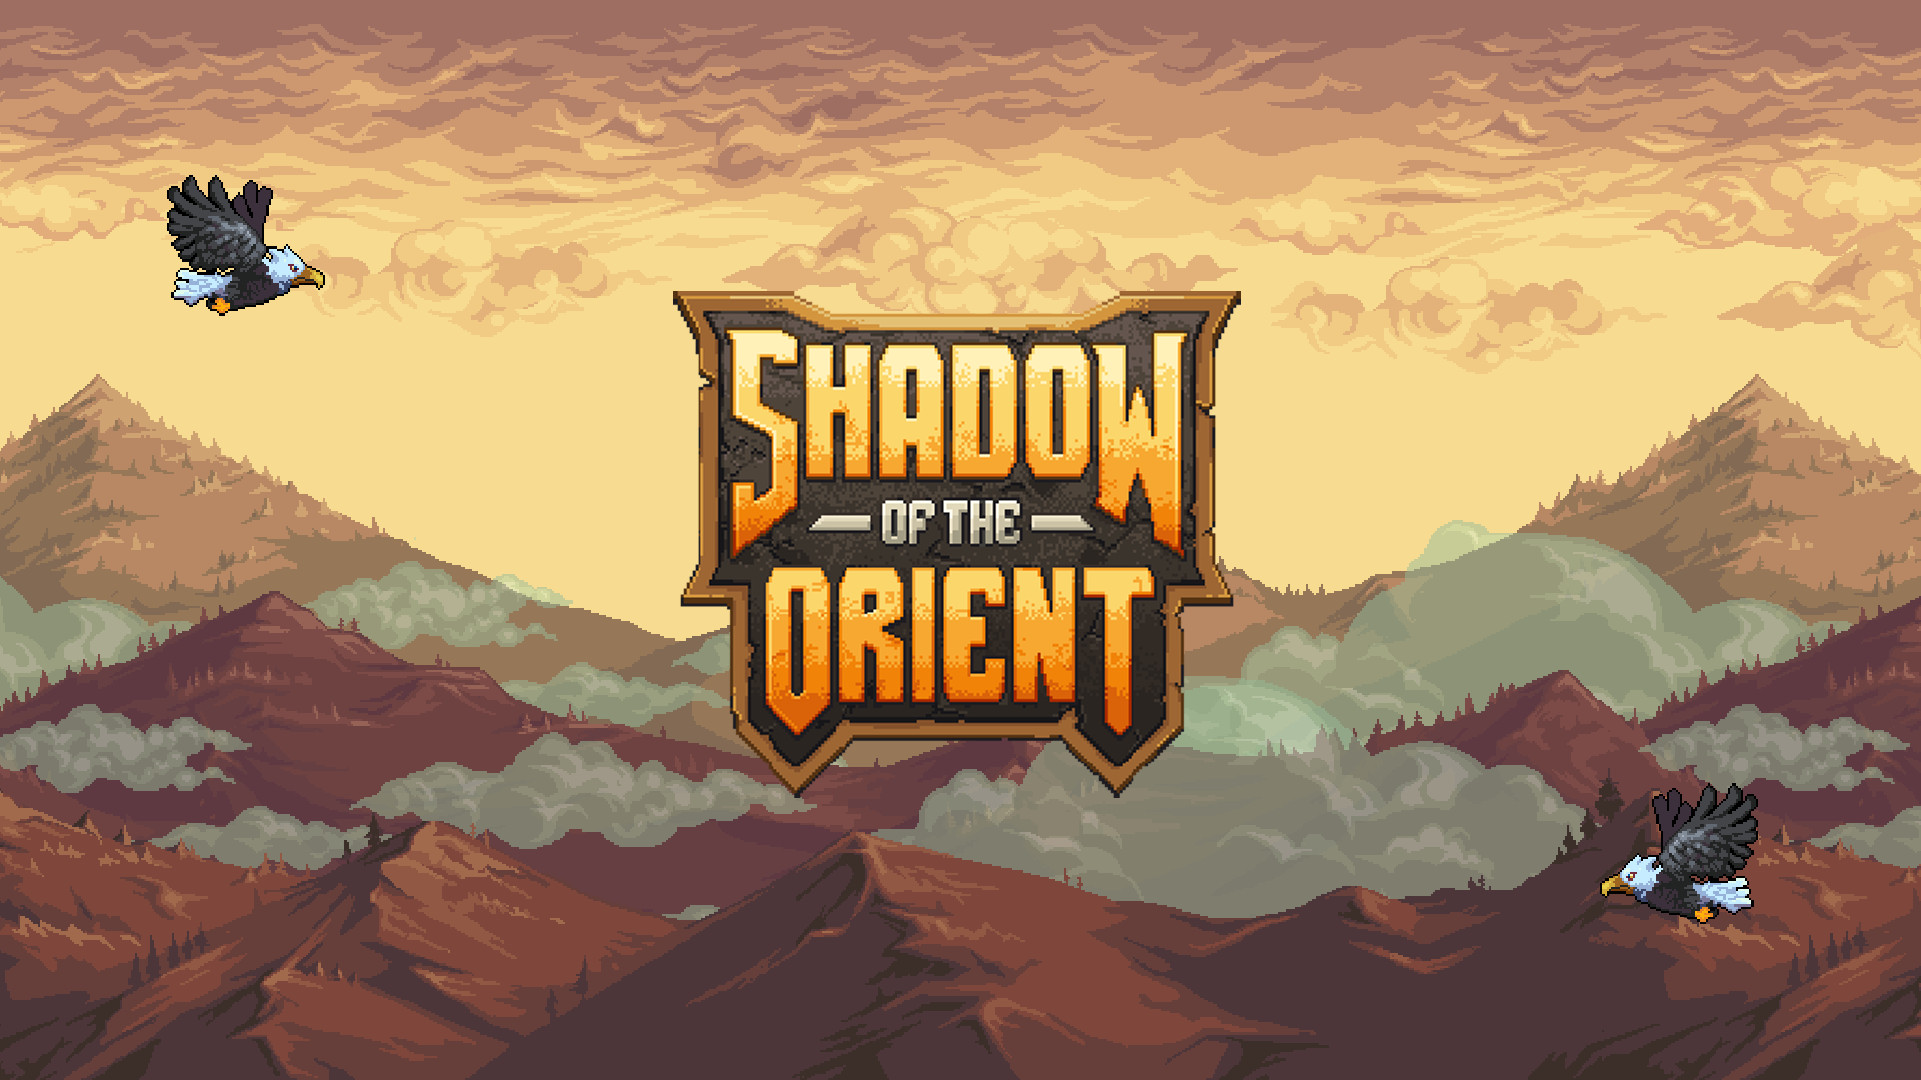 Shadow of the Orient